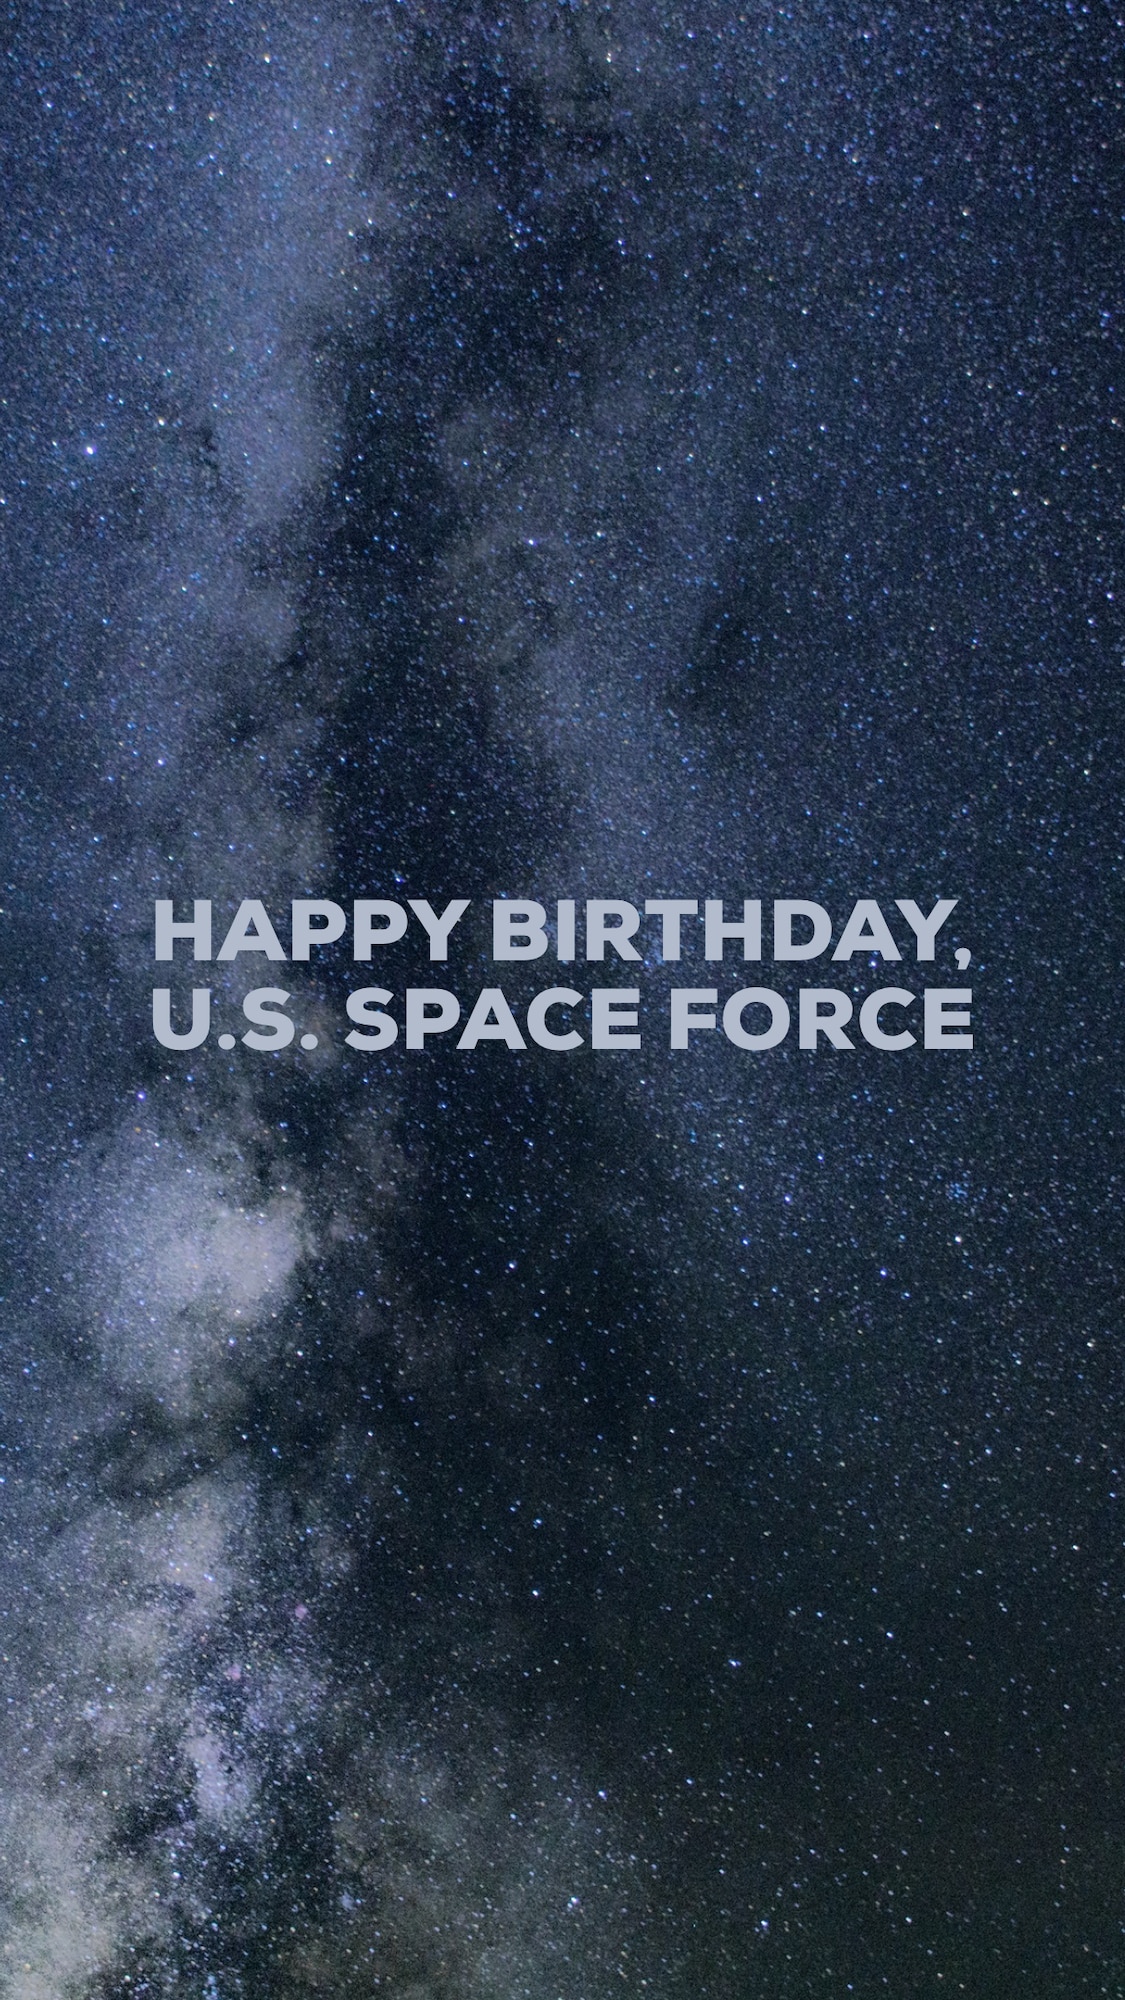 Happy Birthday to the newest branch of the armed forces: the U.S. Space Force! Established on Dec. 20, 2019, the U.S. Space Force will organize, train and equip space forces to defend our nation, allies and American interests. (U.S. Air Force graphic/Tech. Sgt. Andrew Park)